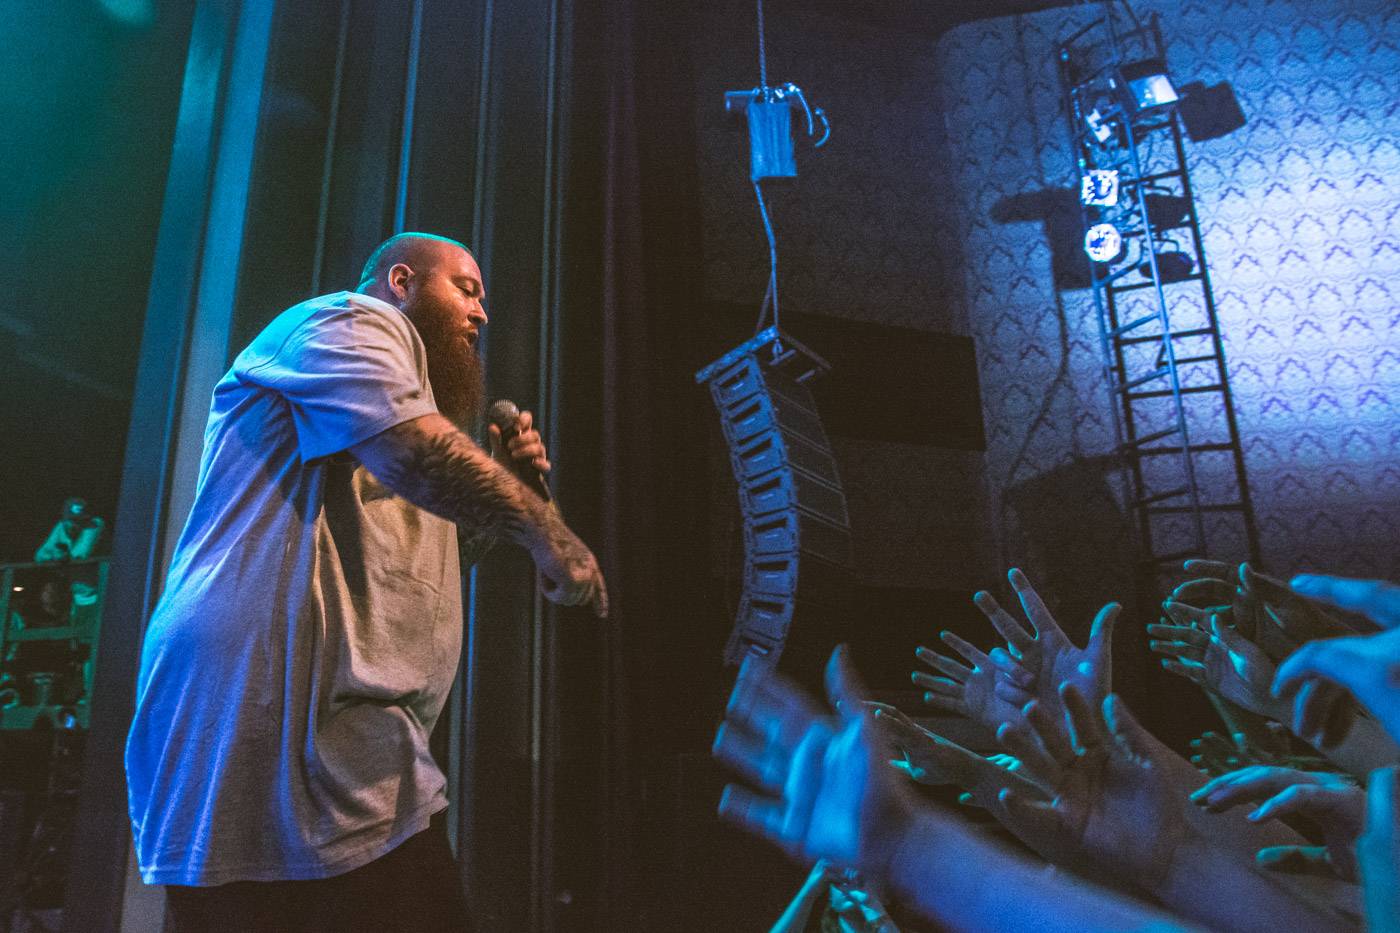 Action Bronson at the Vogue Theatre, Vancouver, May 21 2015. Pavel Boiko photo.